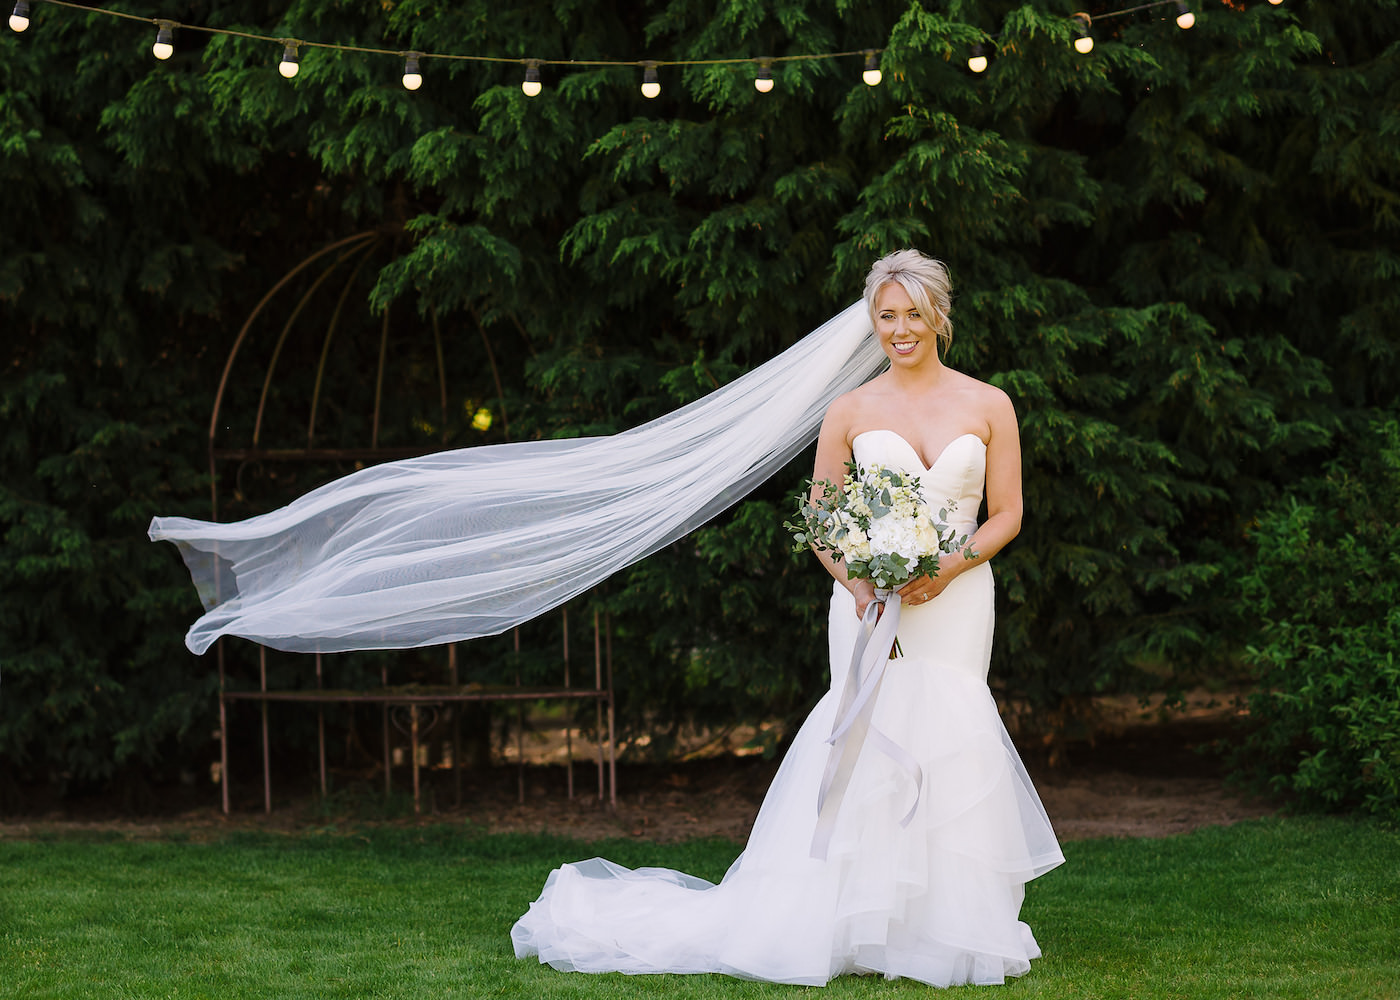 Bride’s long white veil lifted by wind at Russets Country House